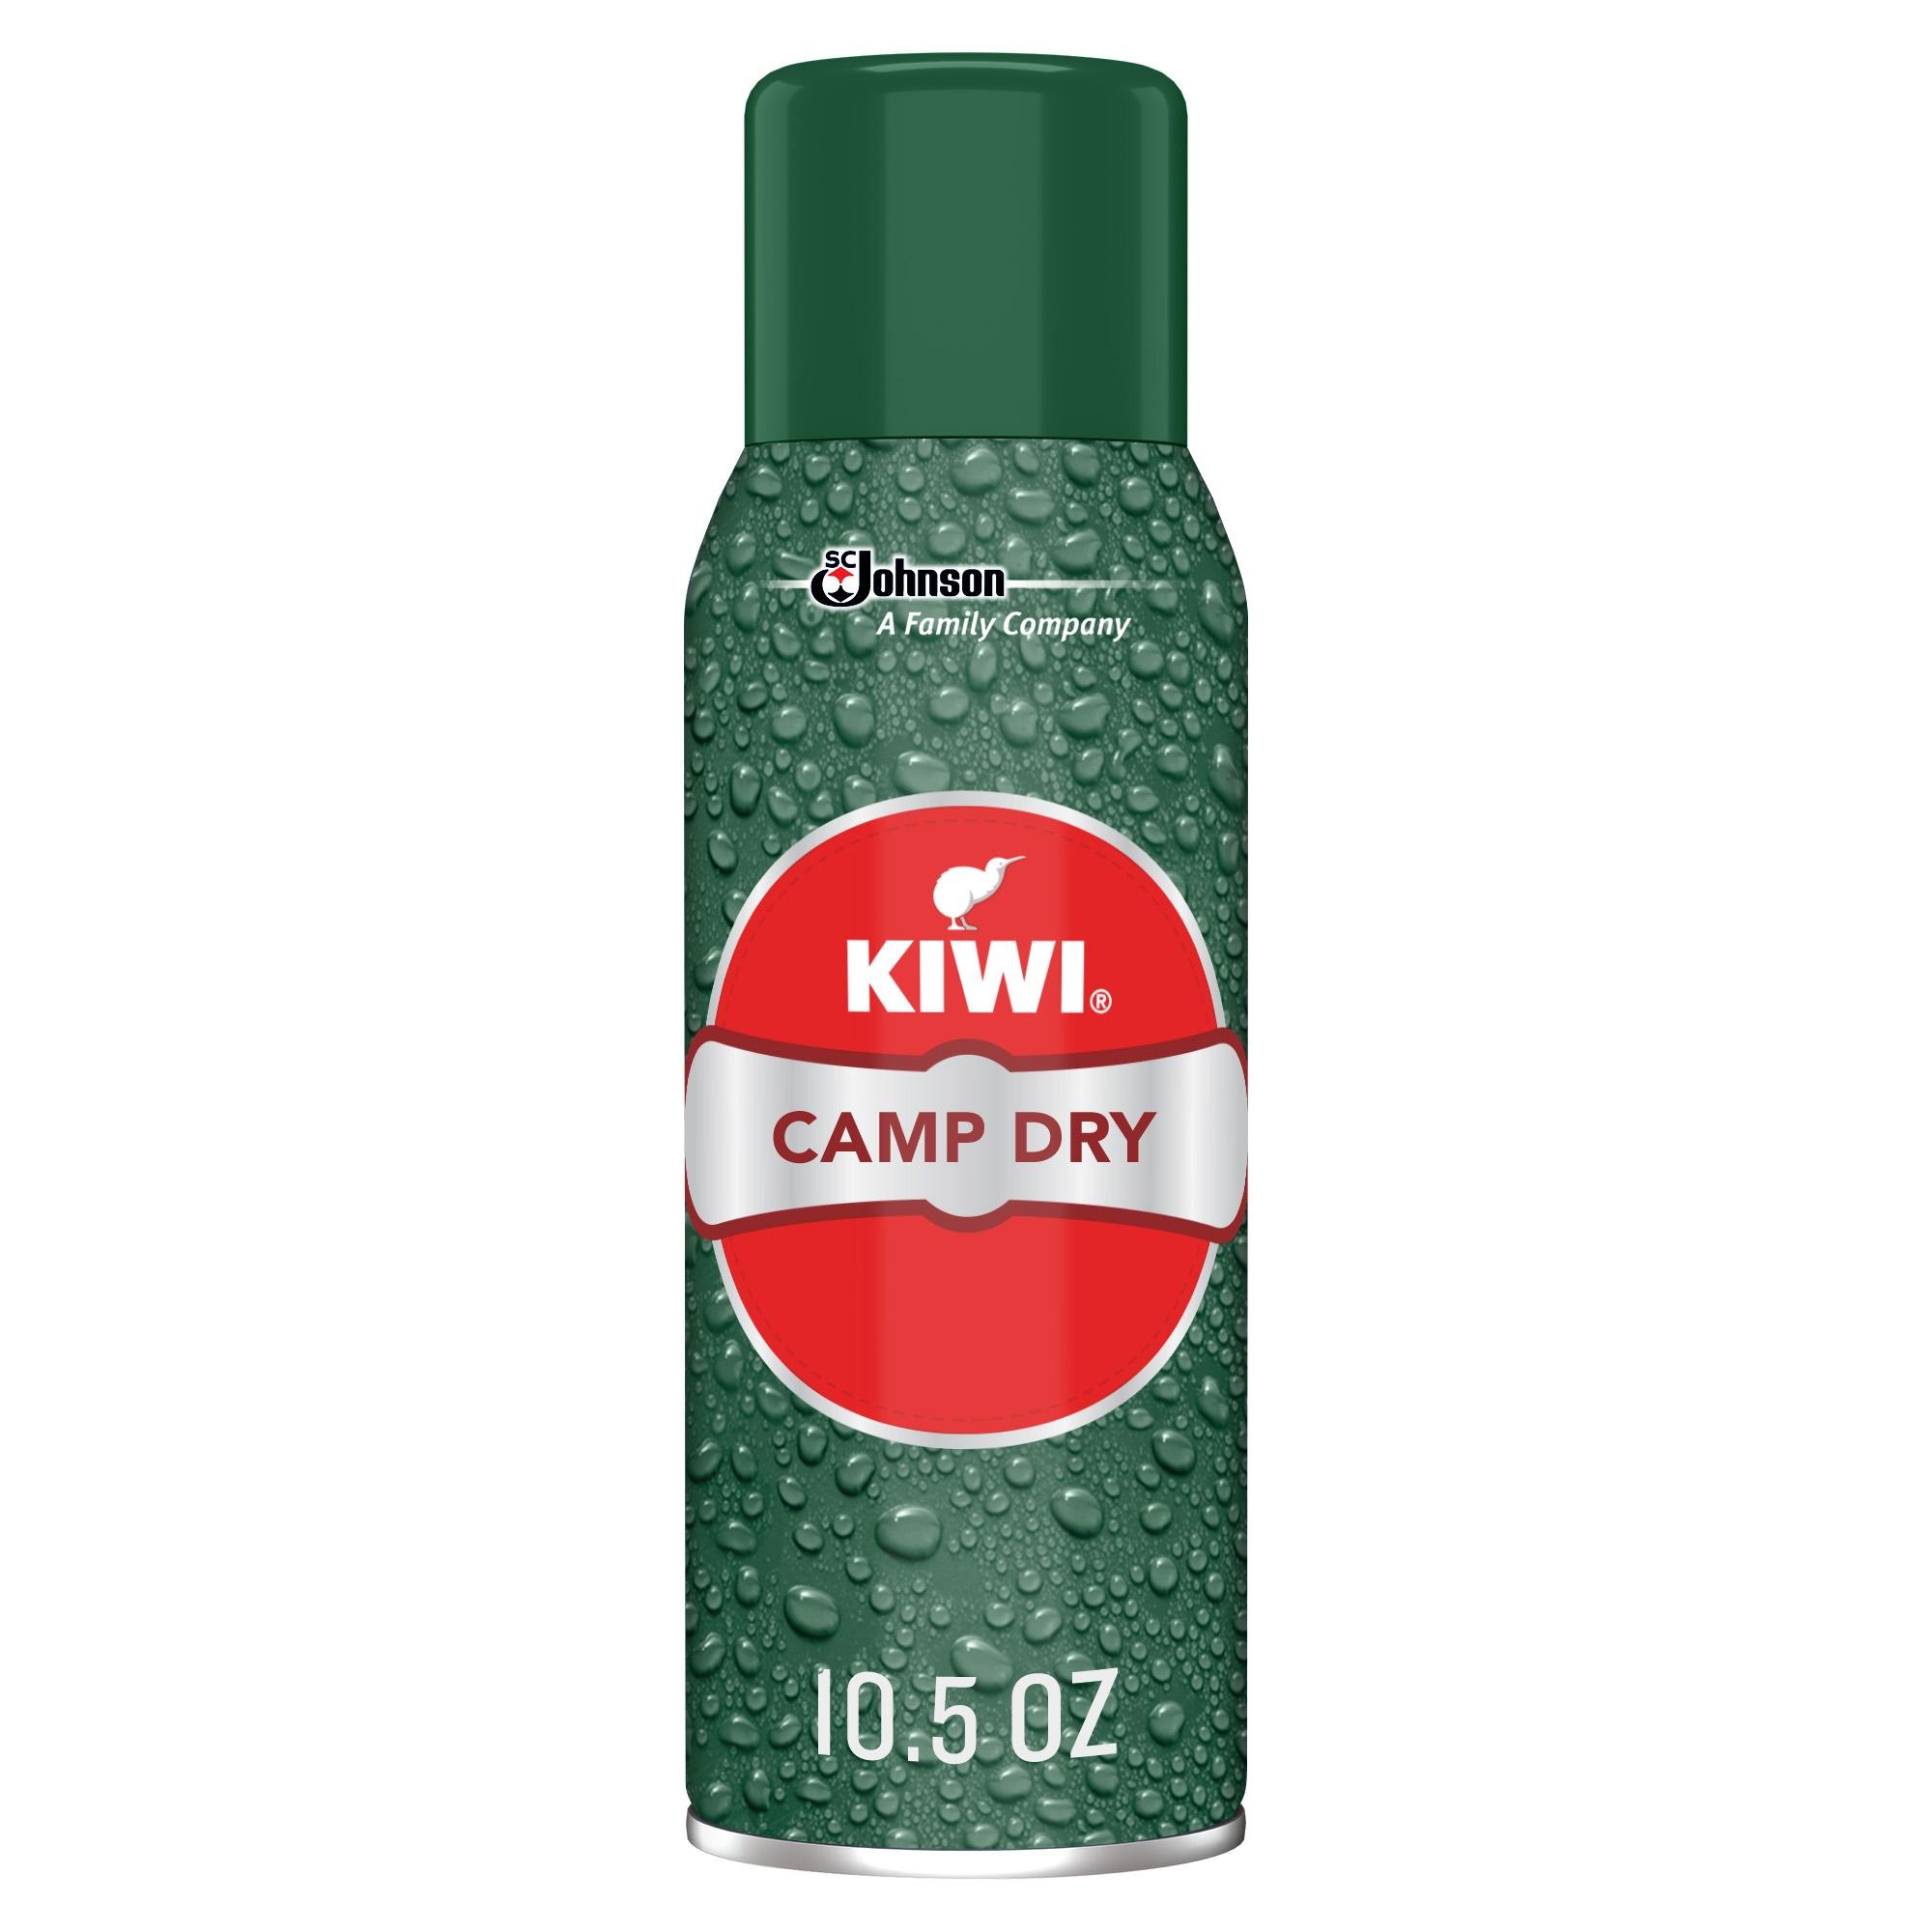 Kiwi Camp Dry 10.5 Oz. Water Repellent Spray 70417 Pack of 4 - All